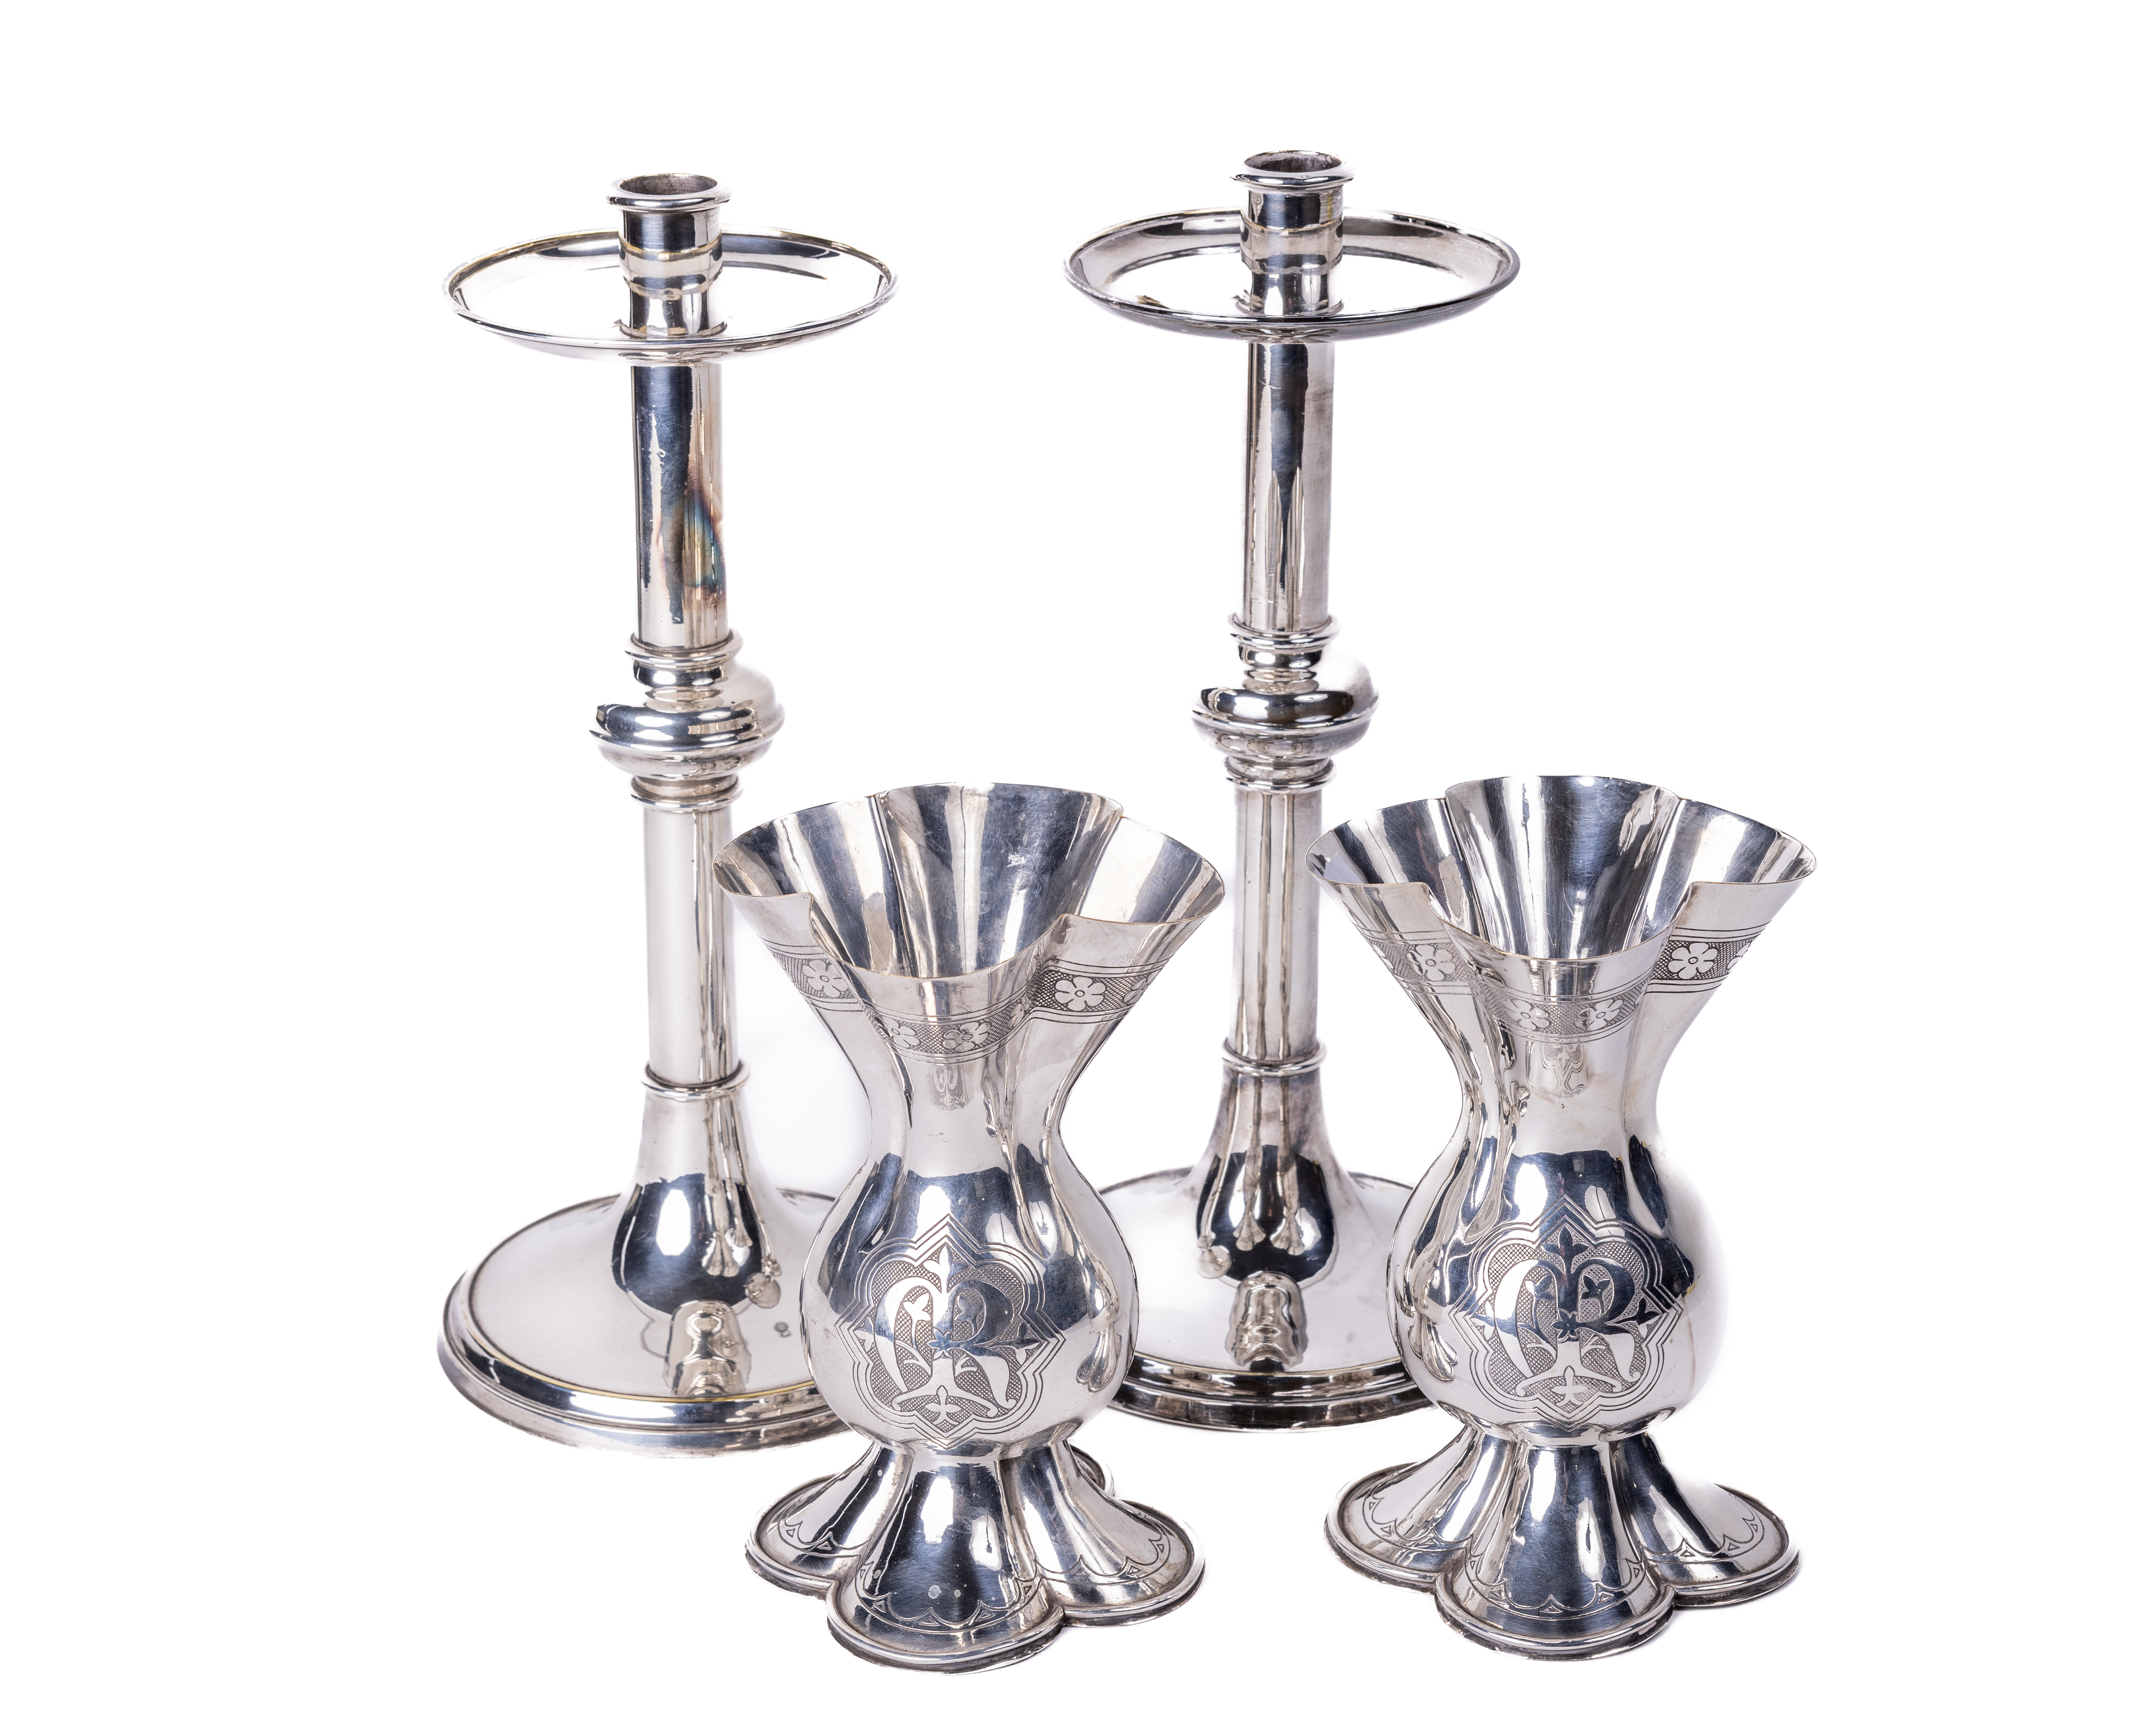 A pair of fine quality silver plated Arts and Crafts pillar Candlesticks, with circular drop tray on